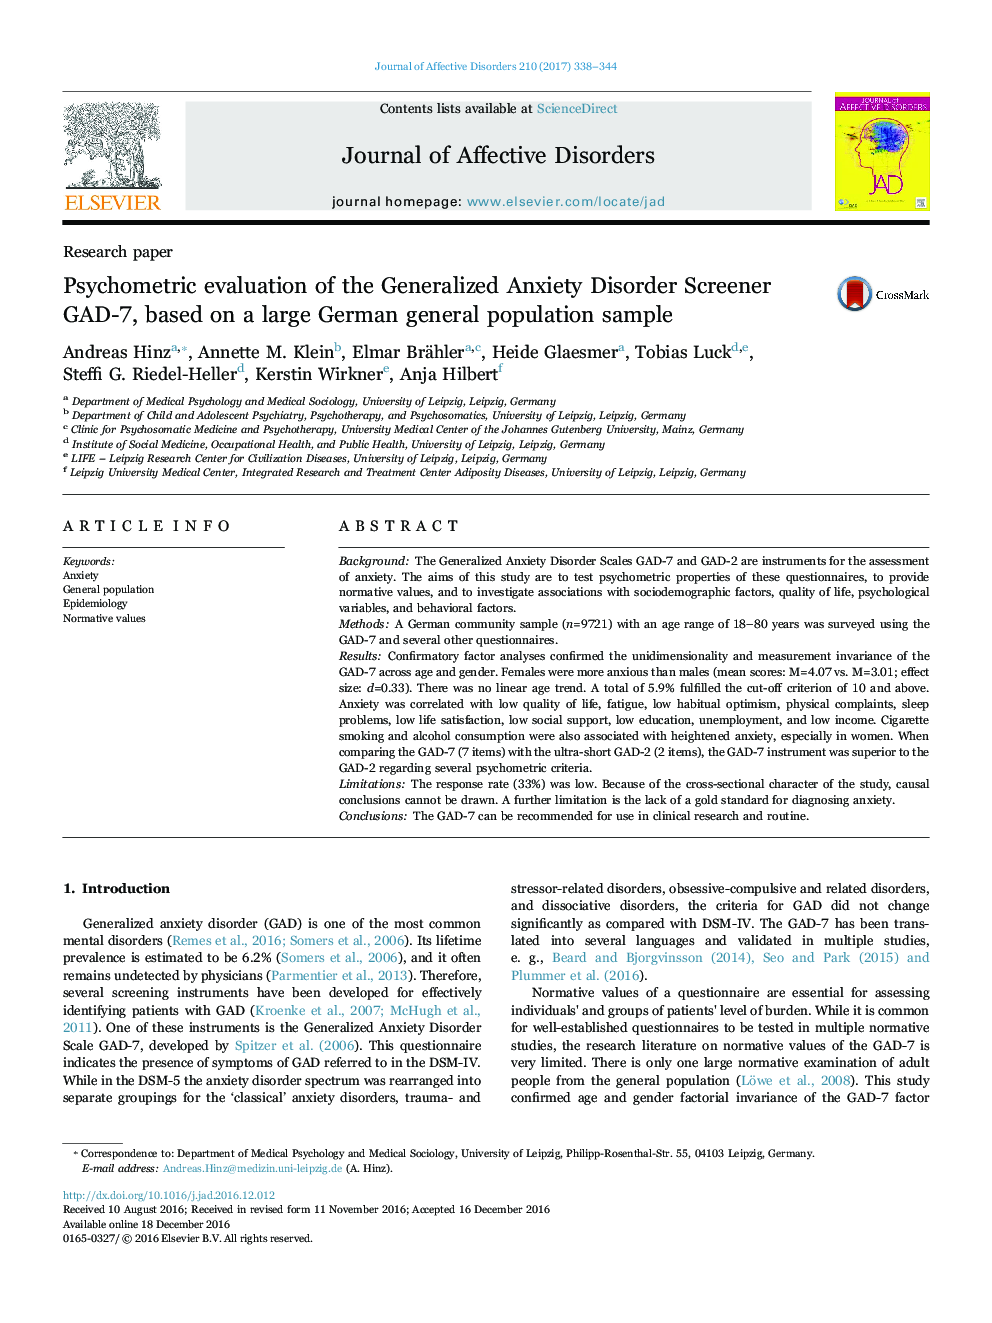 Research paperPsychometric evaluation of the Generalized Anxiety Disorder Screener GAD-7, based on a large German general population sample